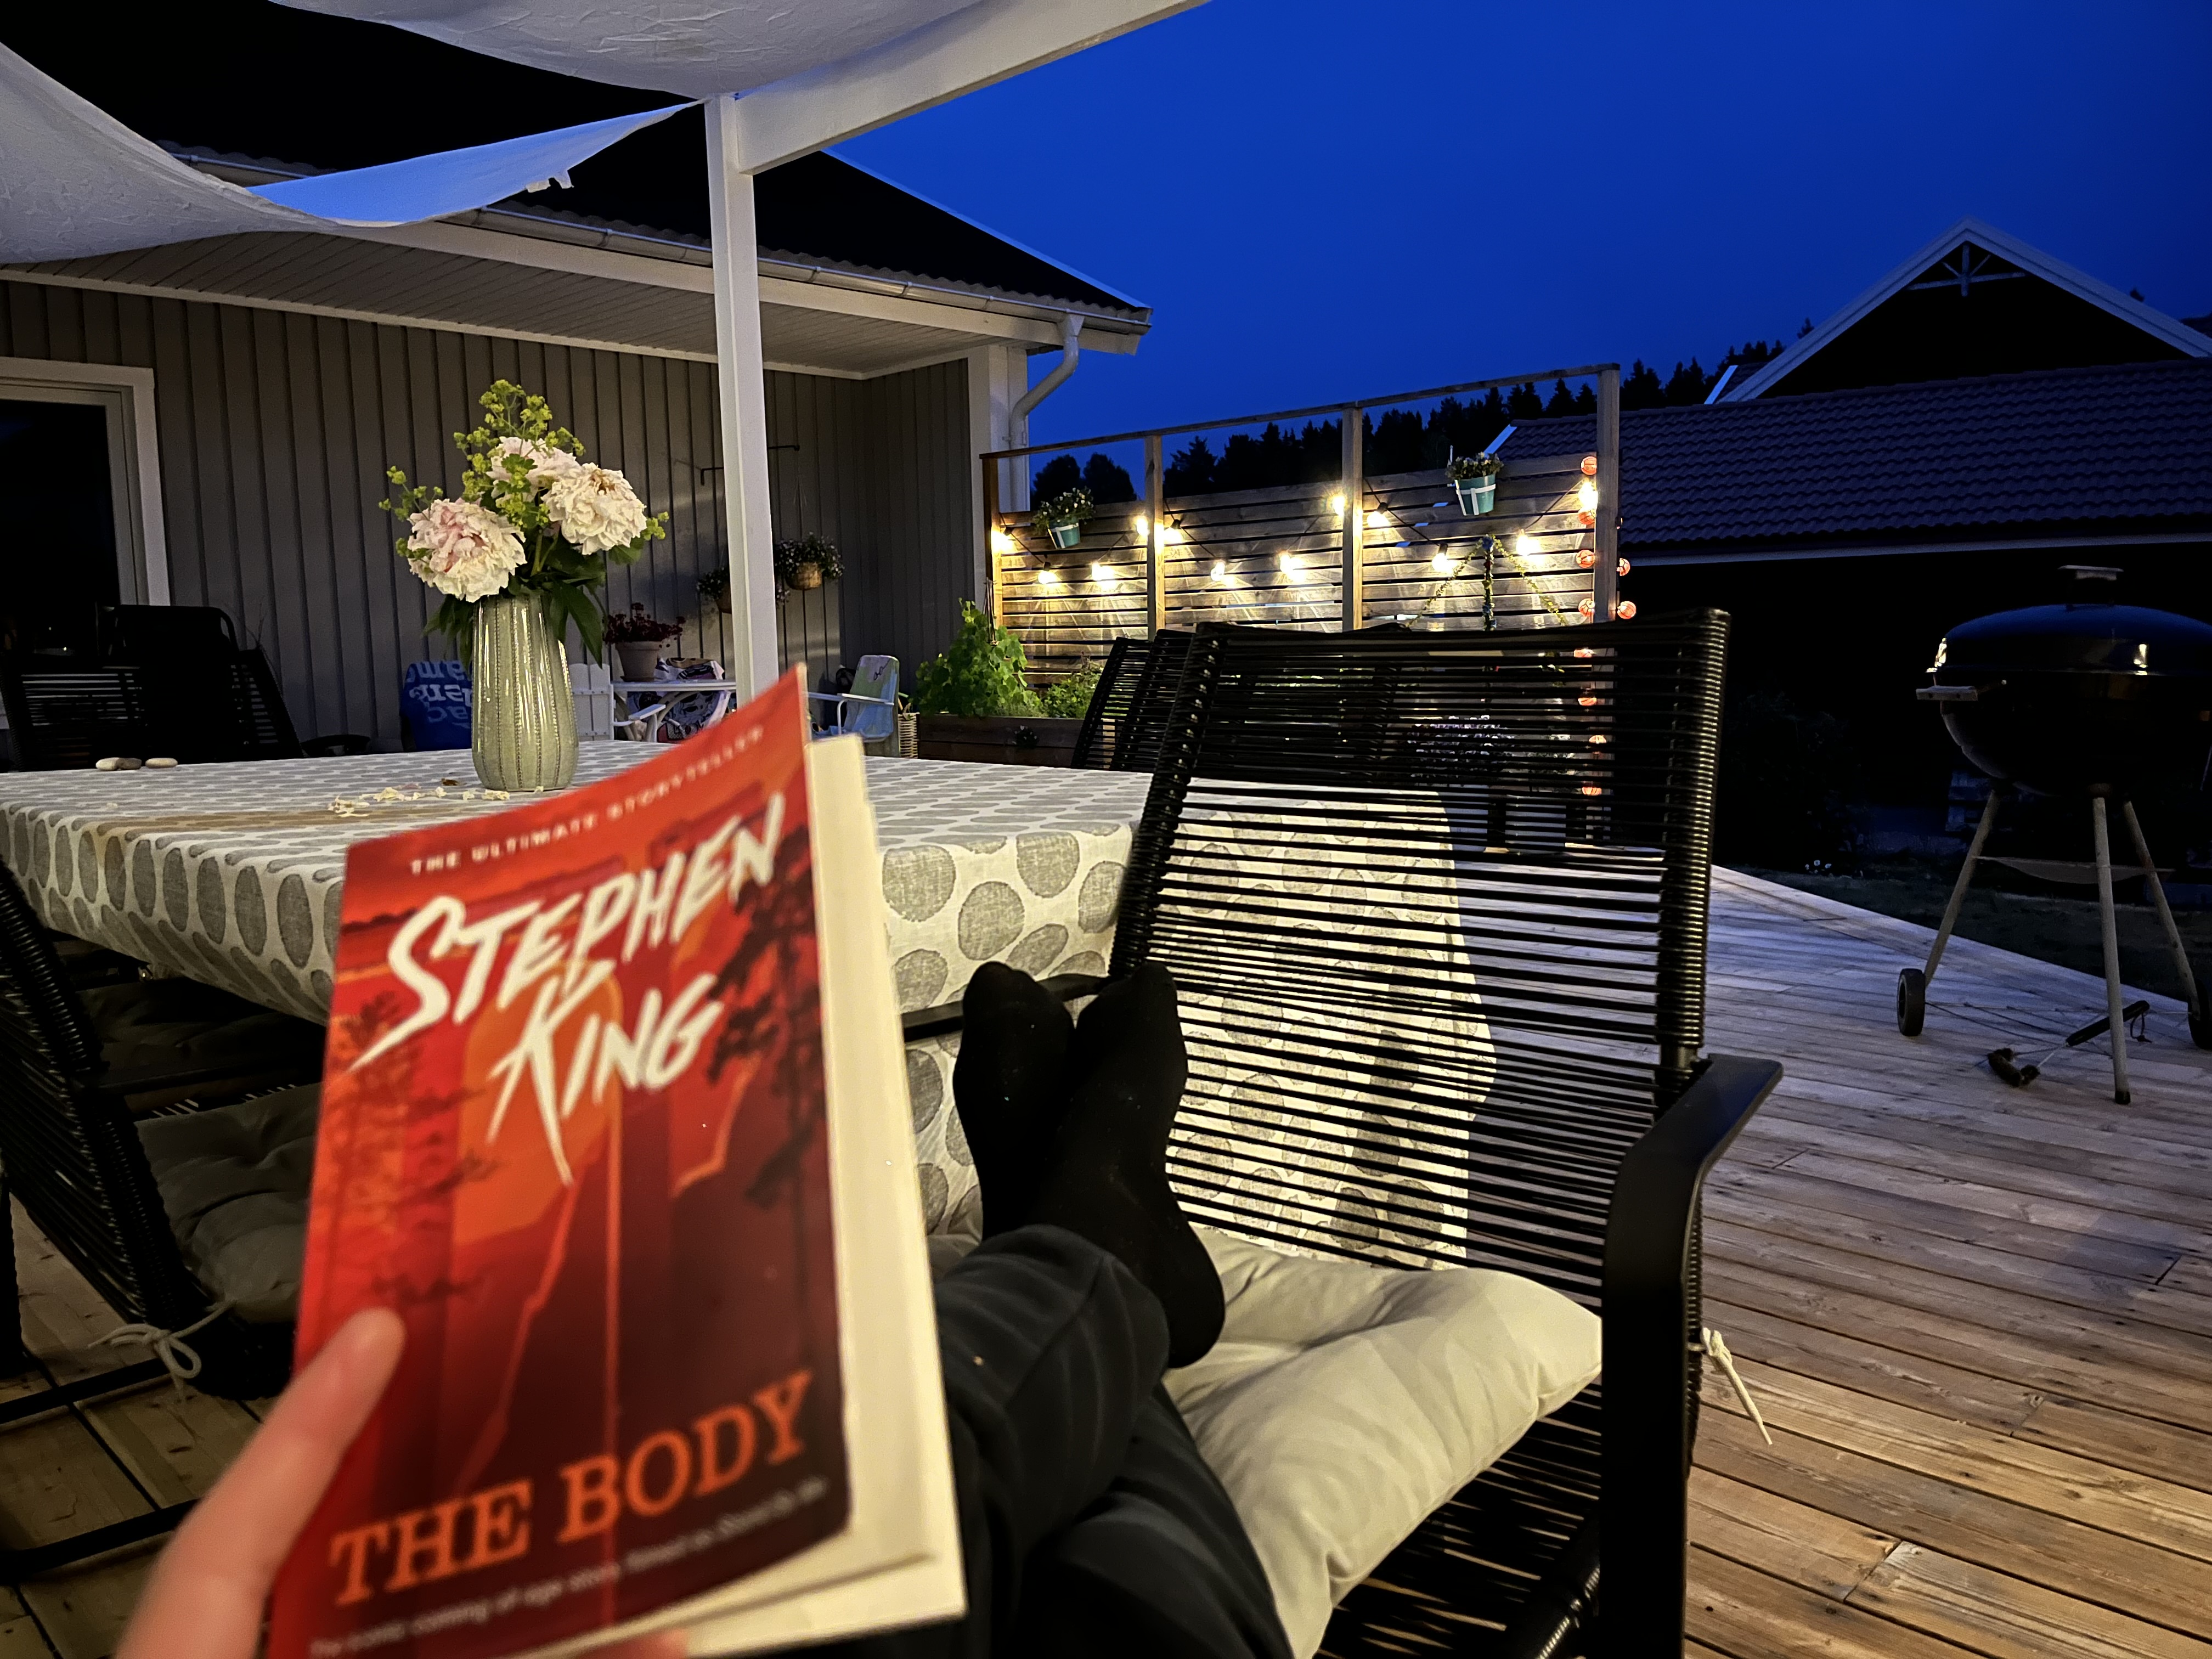 My POV on the deck. Book in hand.